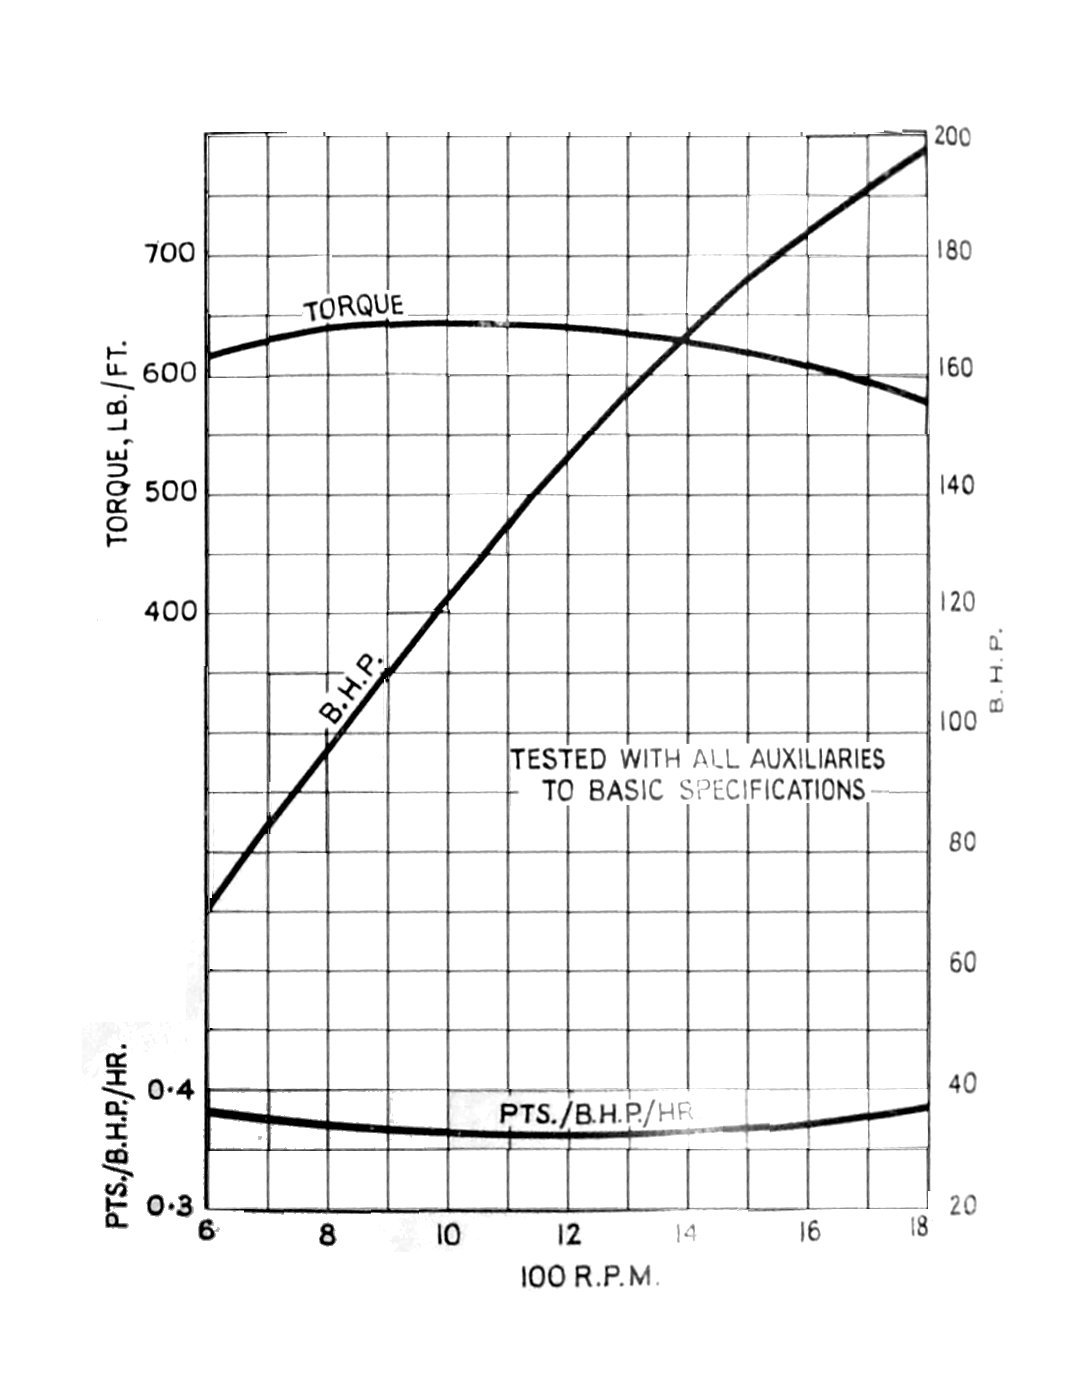 Torque and Power curves for BUT Leyland Engine